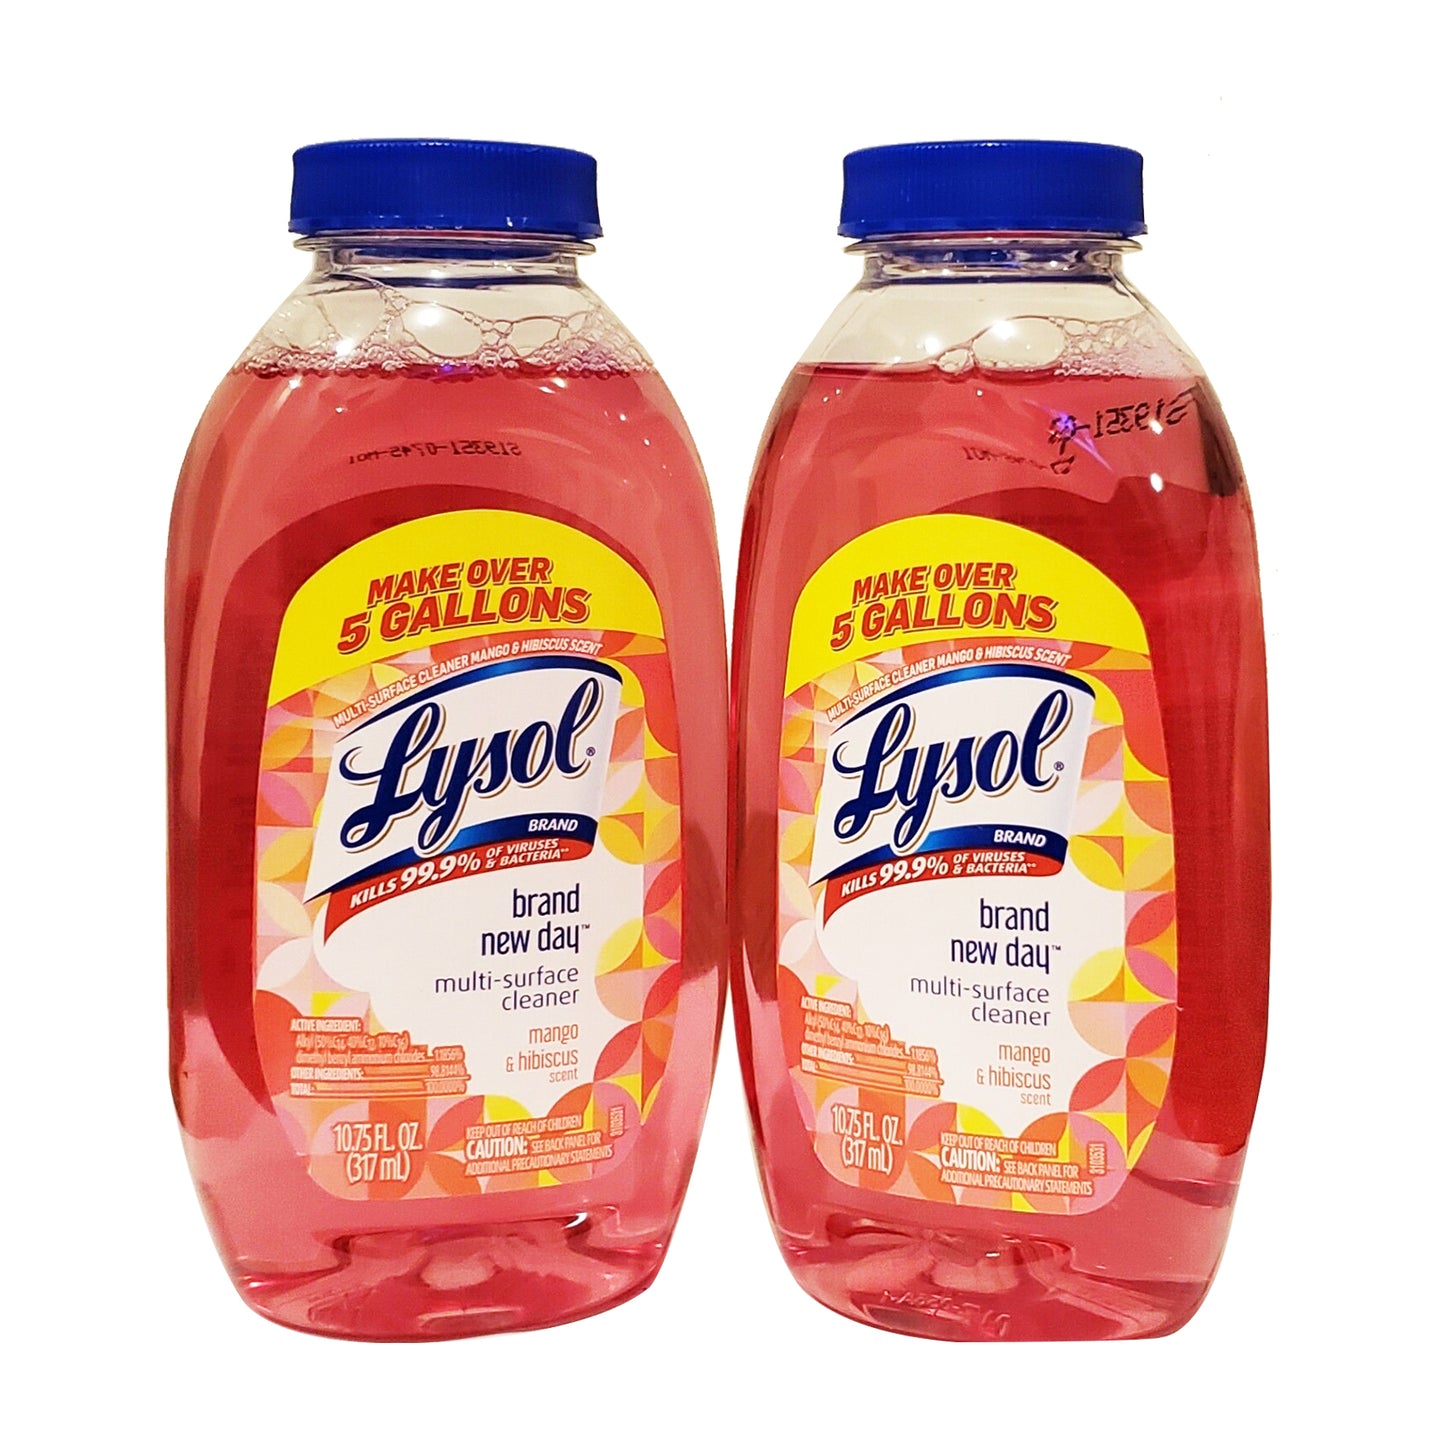 Lysol Multi Surface Cleaner Mango&hibiscus 10.5 oz Make over 5 Gallons "2-PACK"